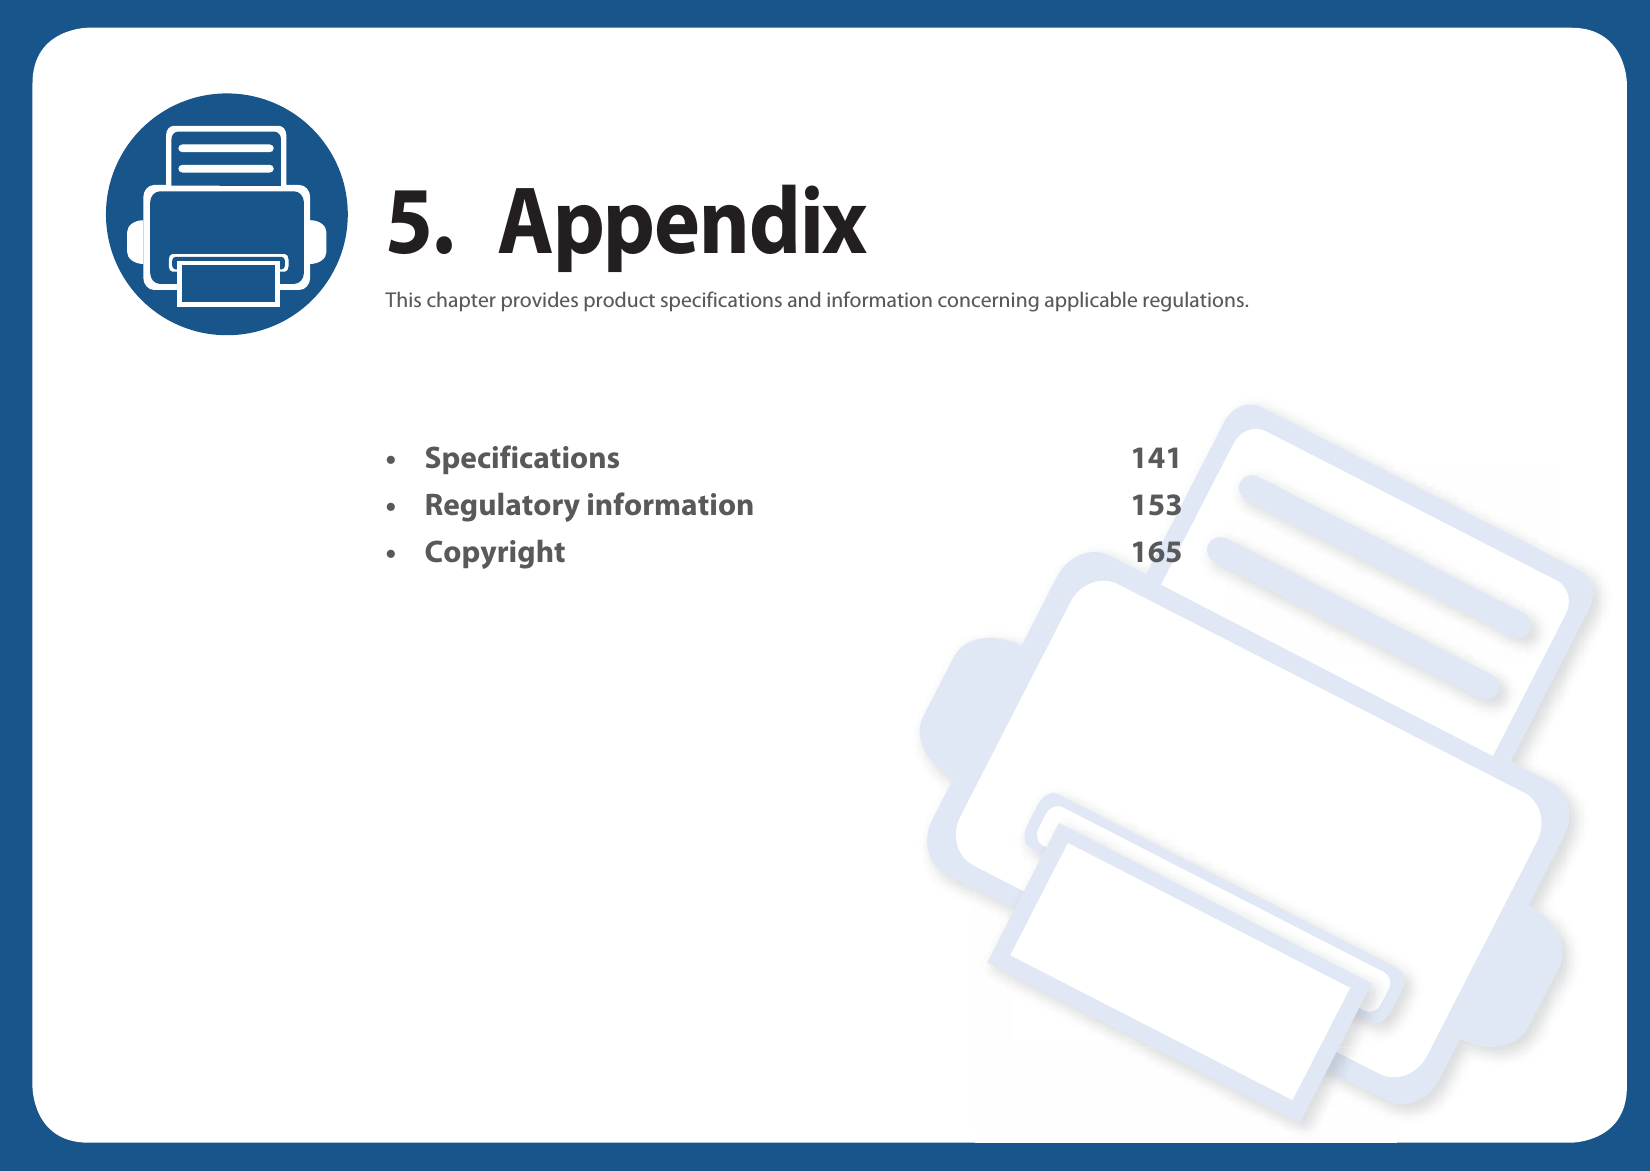 5. AppendixThis chapter provides product specifications and information concerning applicable regulations.• Specifications 141• Regulatory information 153• Copyright 165